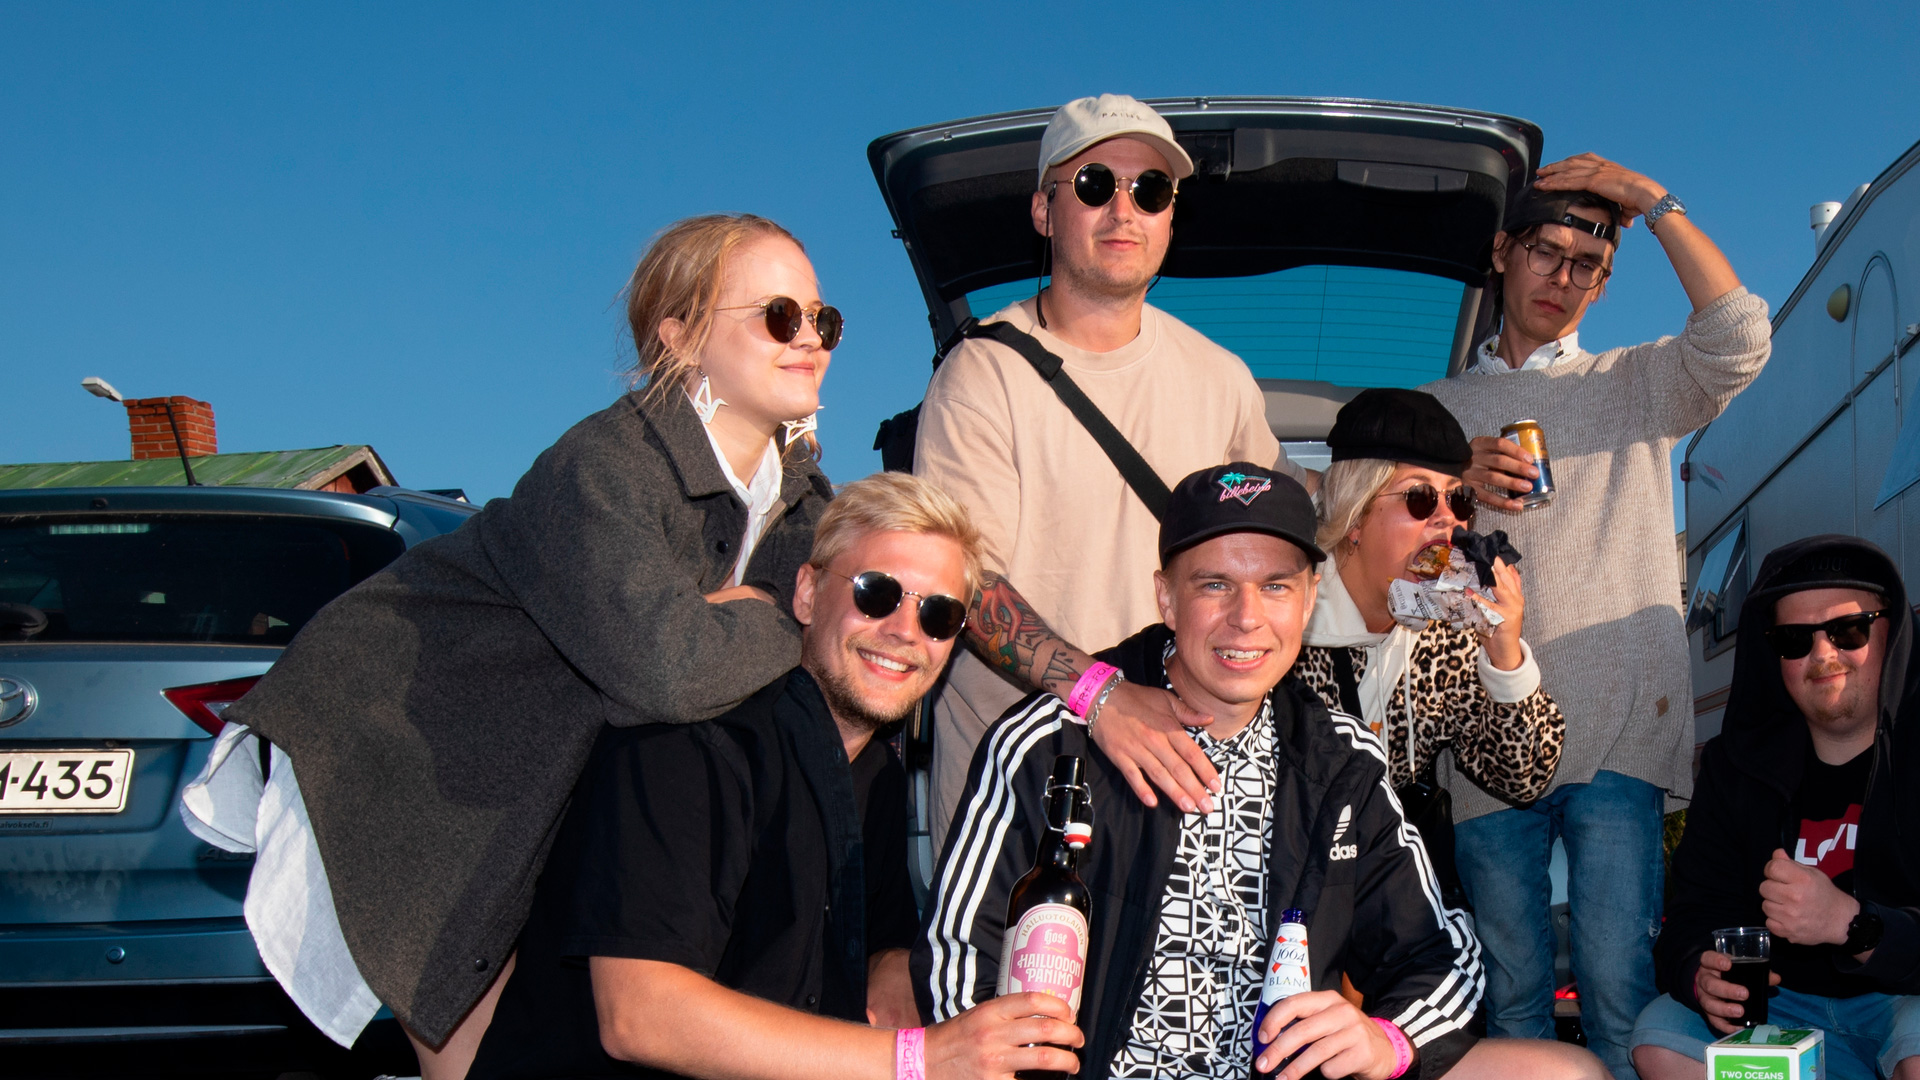 Young people are posing in front of the open trunk of a car. They are holding beverages and wearing relaxed clothes, some have sunglasses on.